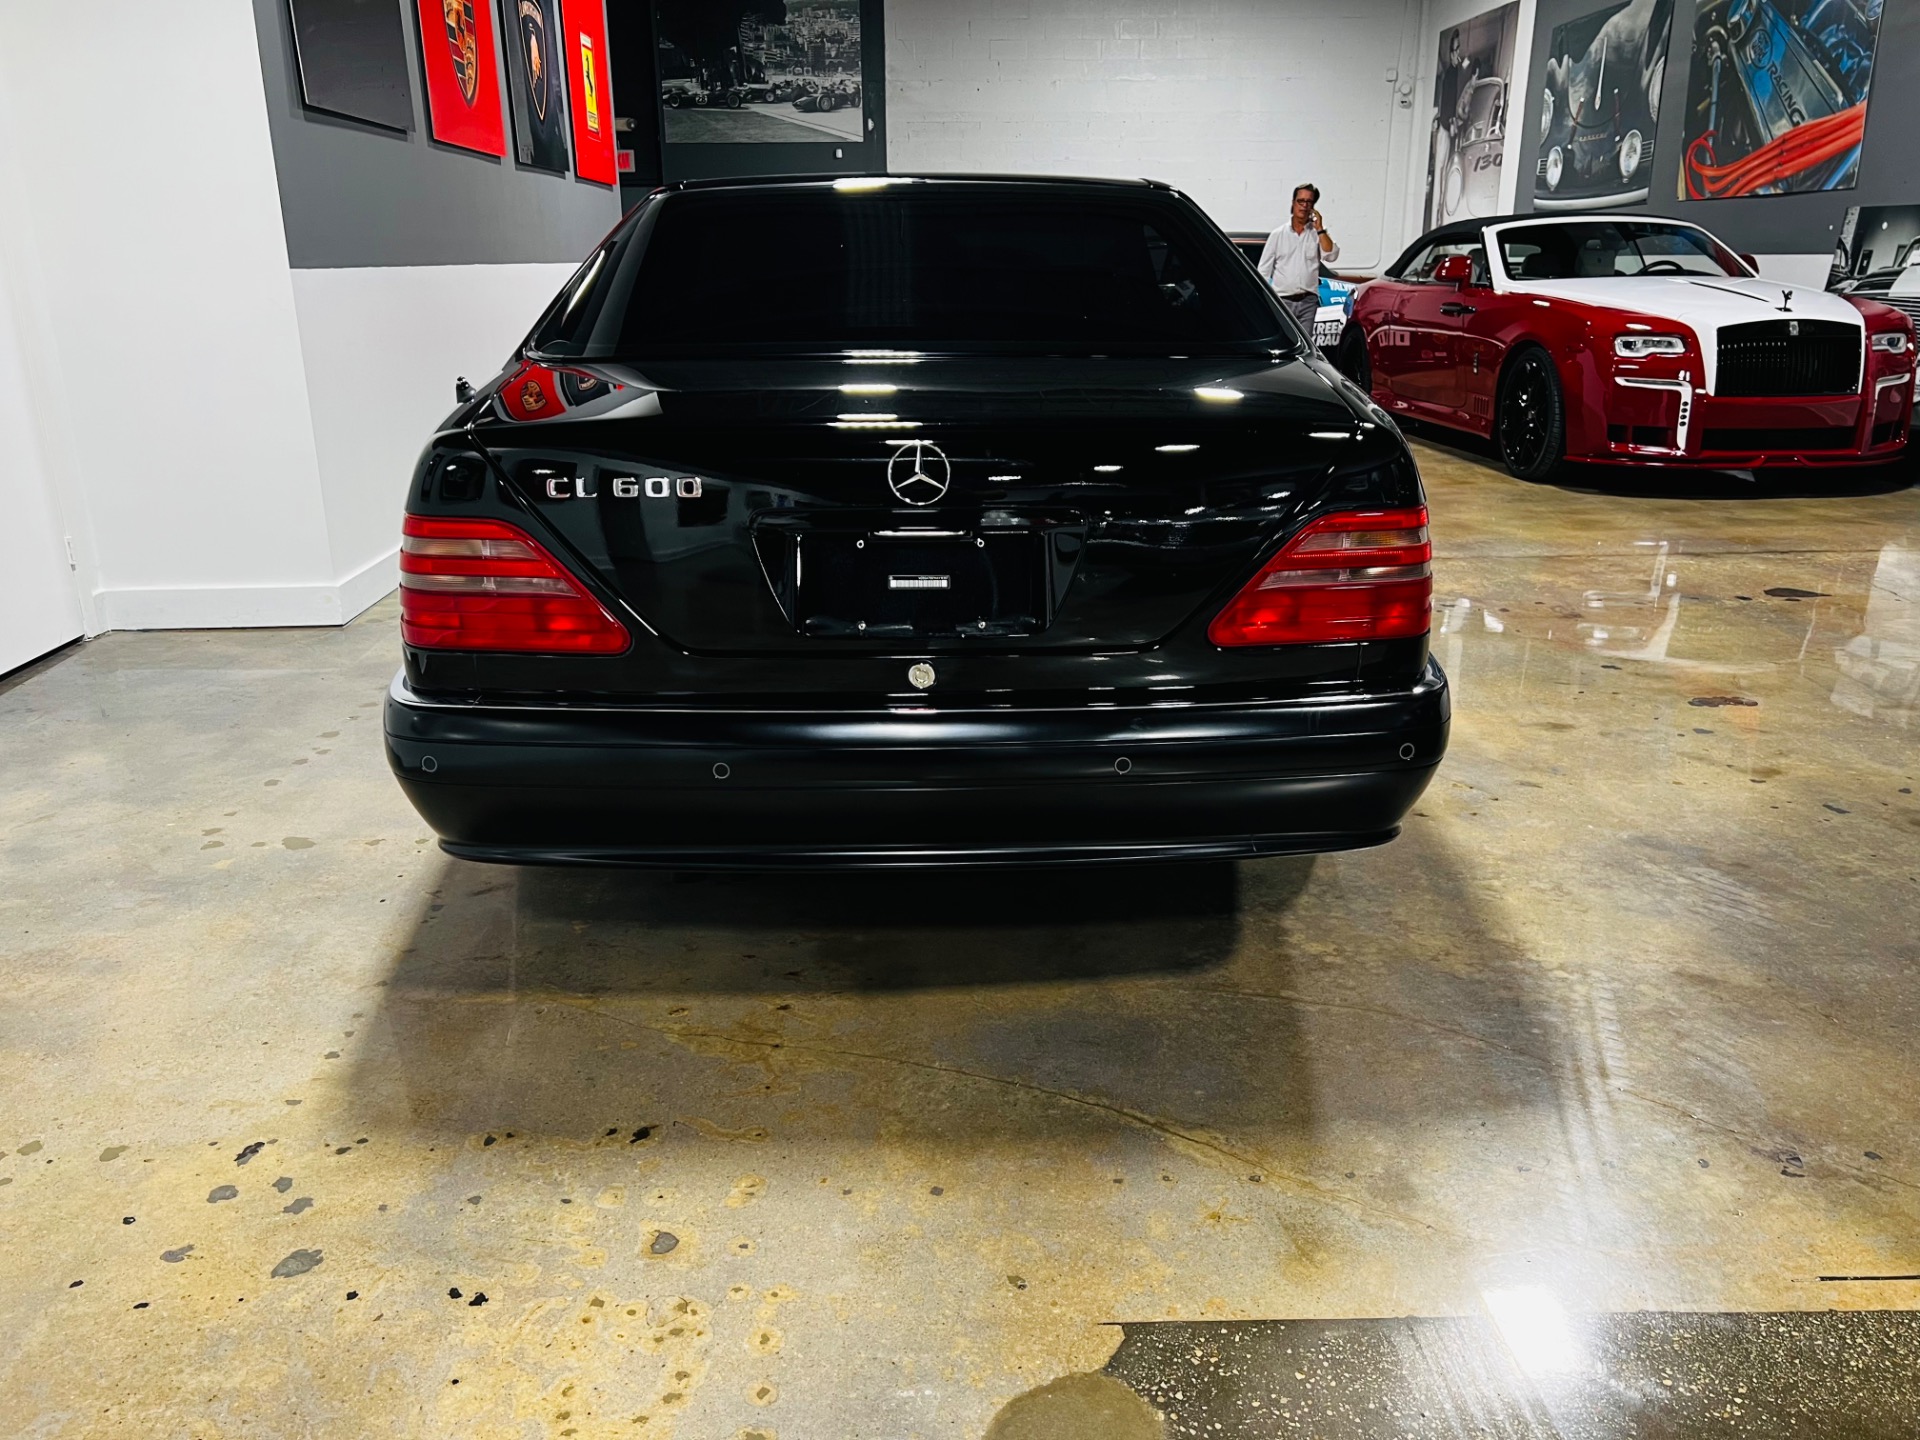 1999 Mercedes-Benz CL-Class CL 600 Stock # C418367-355 visit  www.karbuds.com for more info